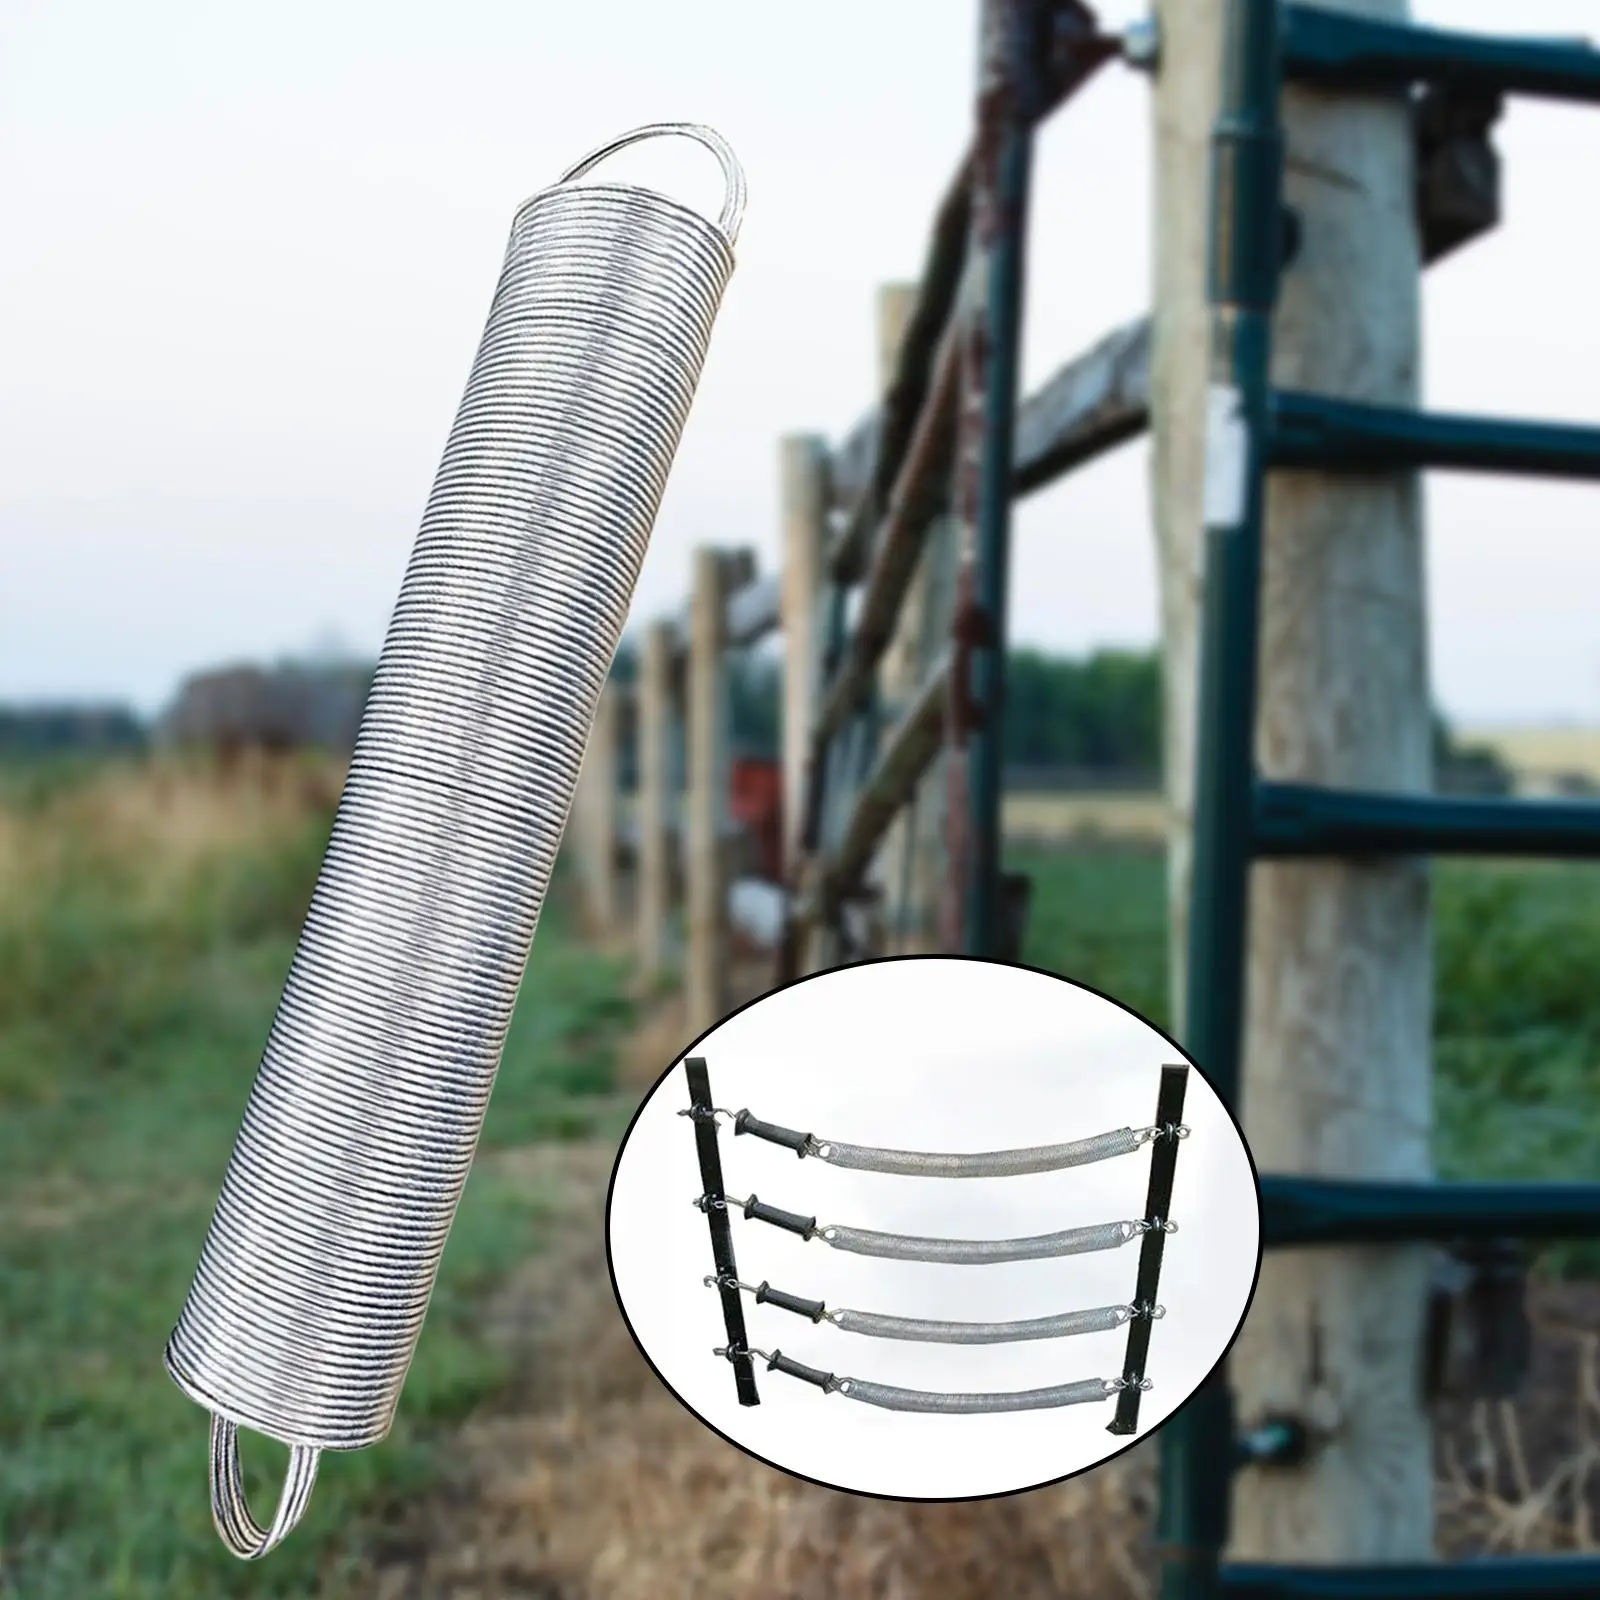 Retractable Spring Gate Simple Installation Livestock Fence Handle Tension Spring for Preventing Animals Intruding Fitments